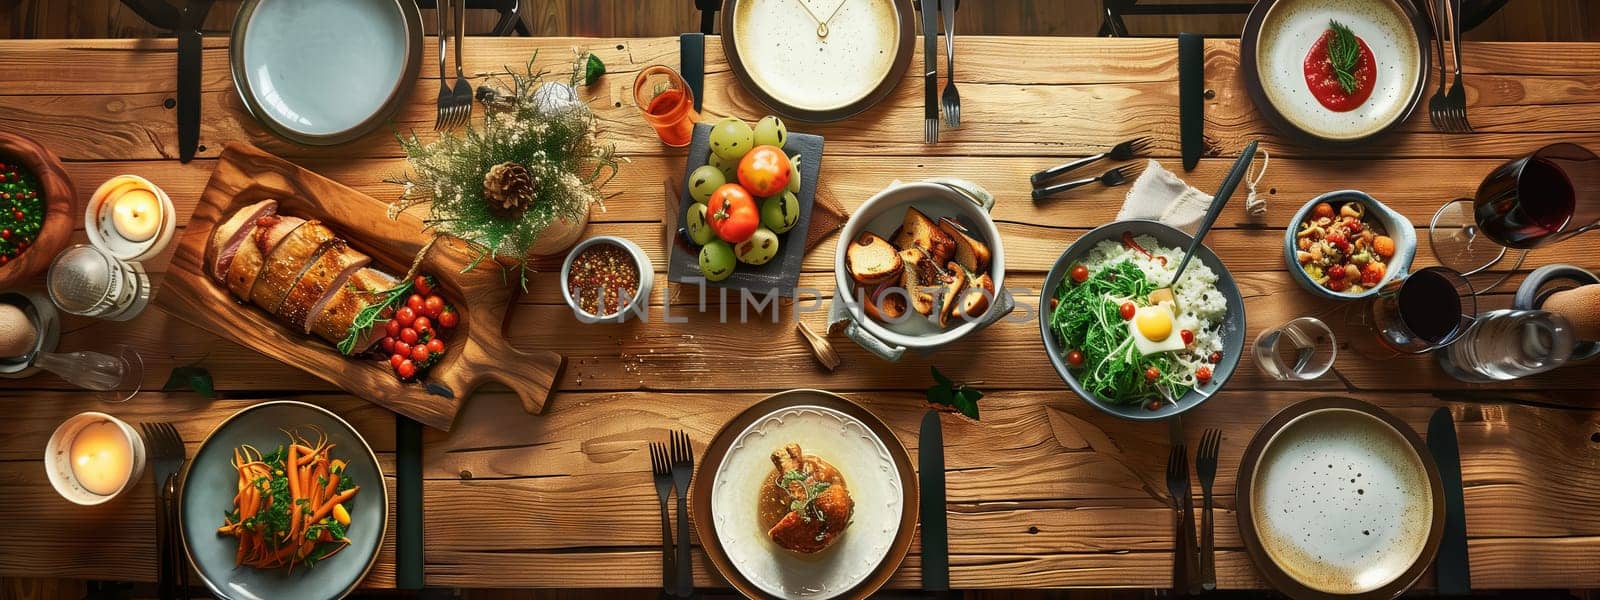 A sturdy hardwood table adorned with plantbased cuisine, featuring an array of colorful vegetable dishes served on elegant wooden tableware